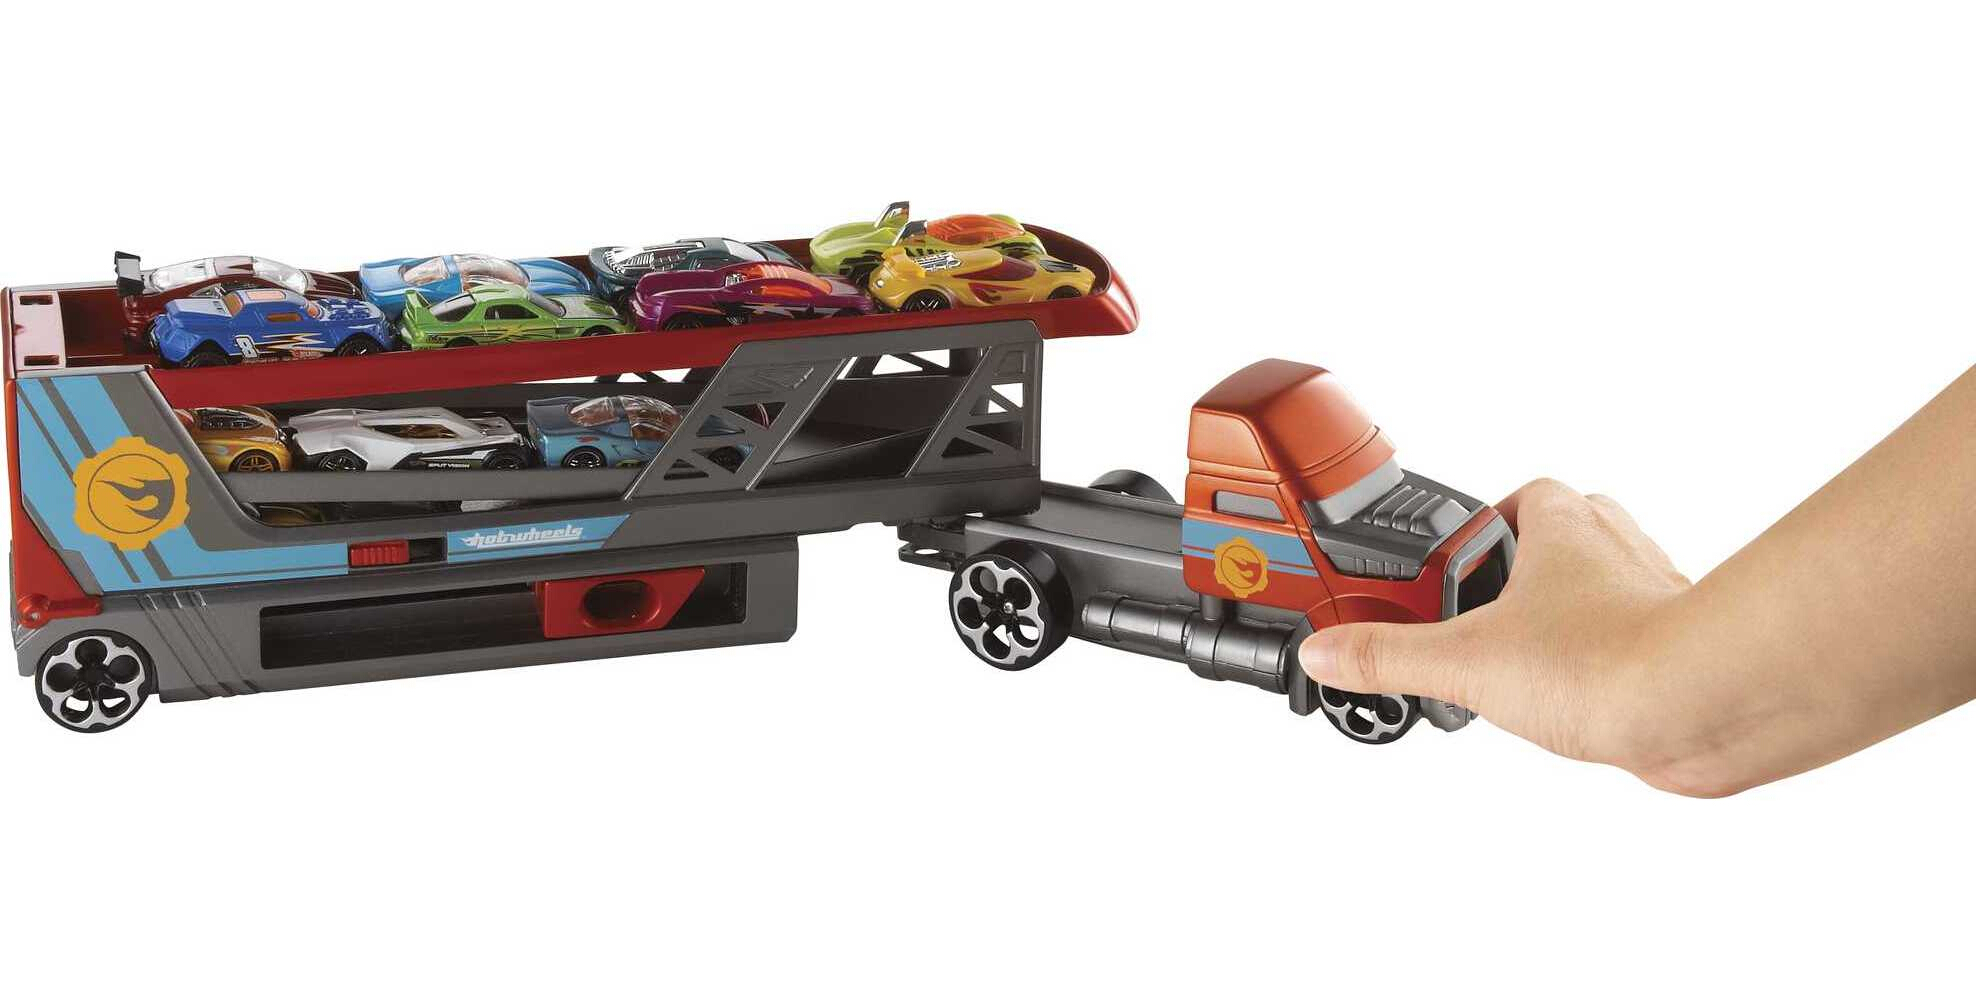 Hot Wheels City Blastin' Rig Hauler & 3 Toy Cars in 1:64 Scale, Launcher & Storage (4 Vehicles) - image 2 of 6